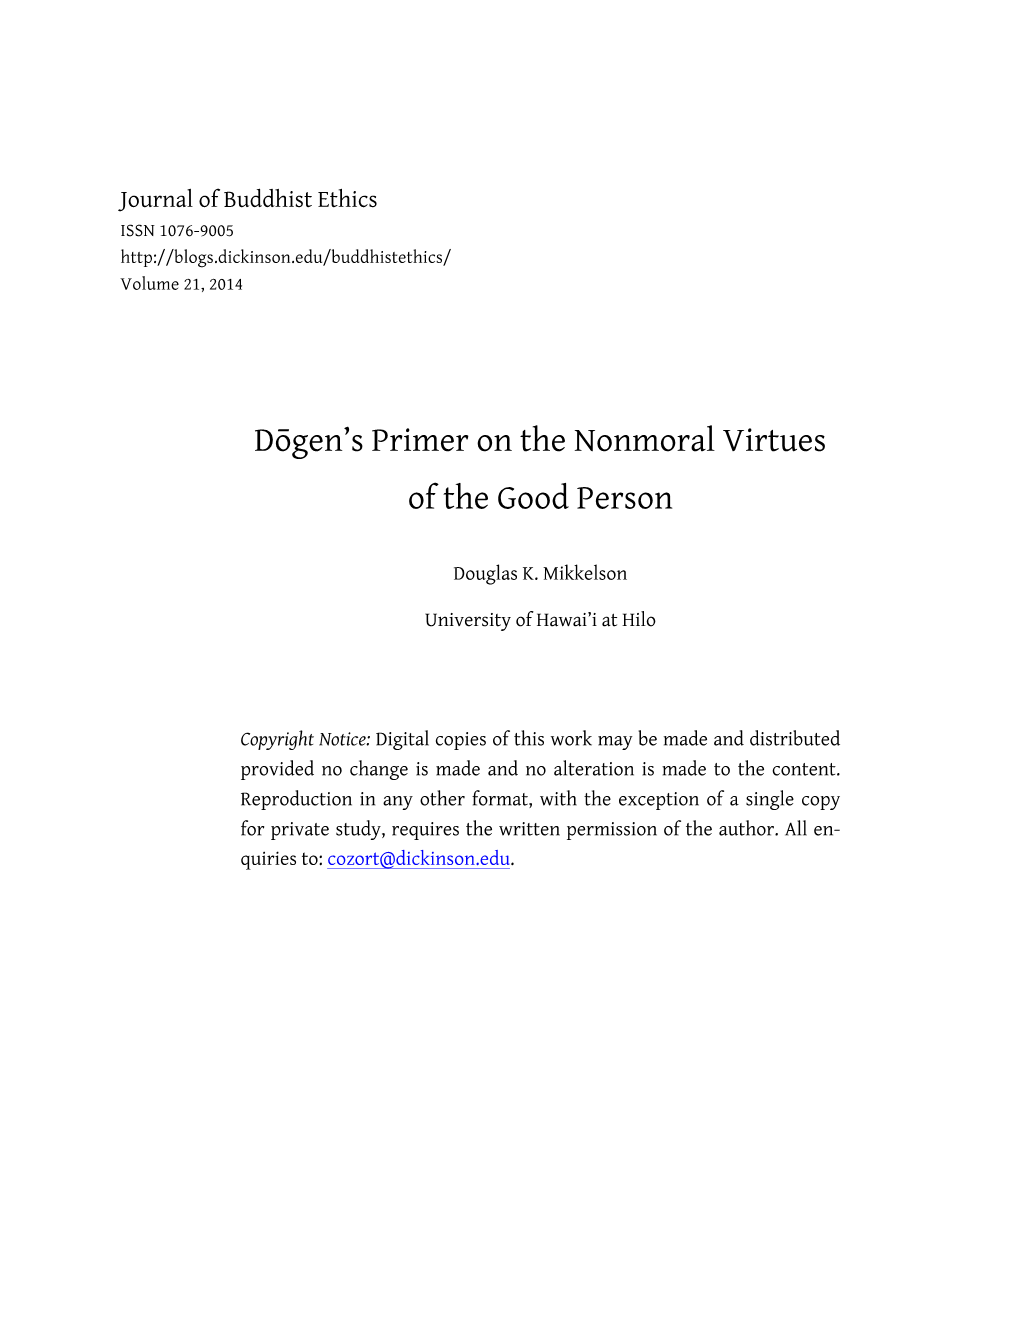 Dōgen's Primer on the Nonmoral Virtues of the Good Person